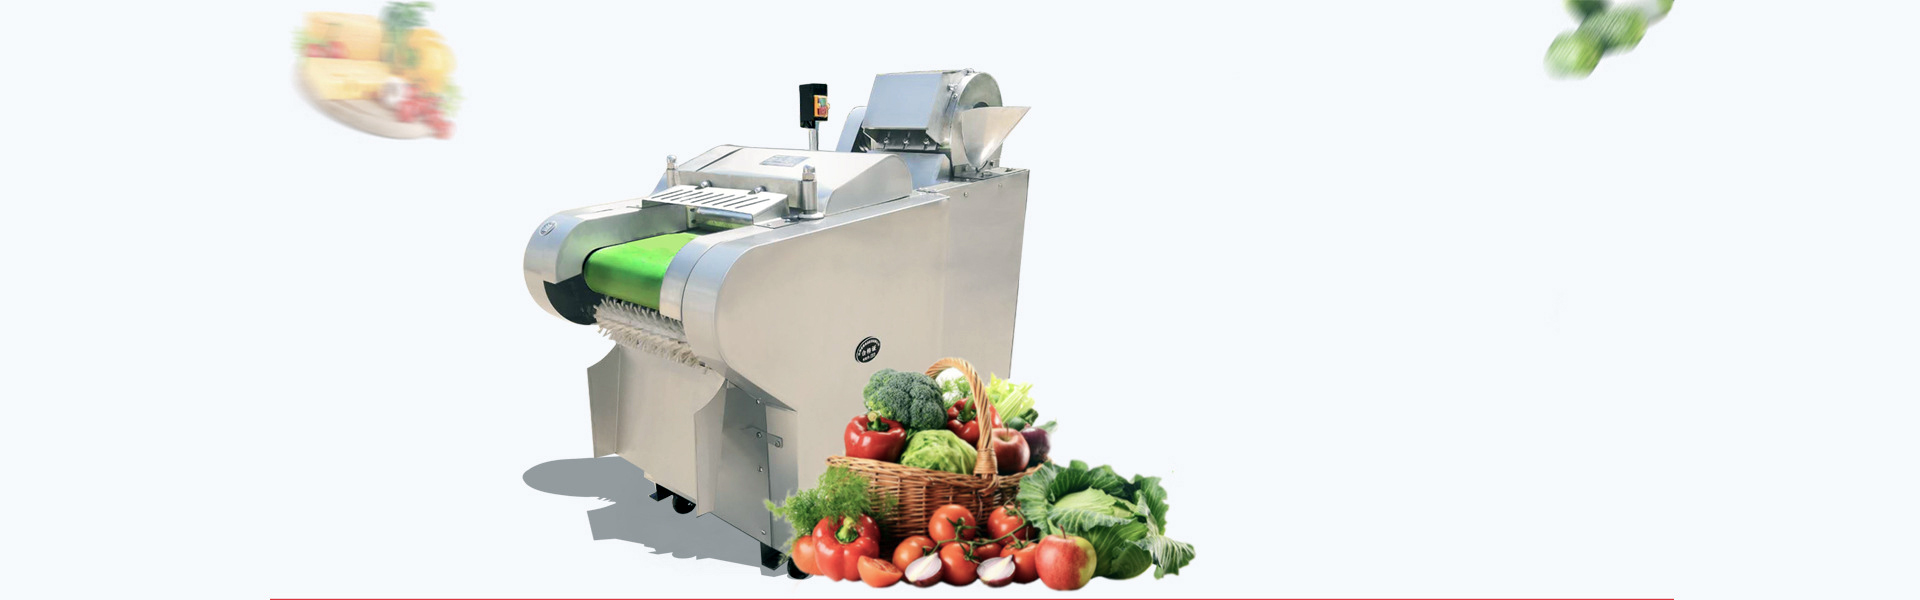 commercial vegetable cutter machine